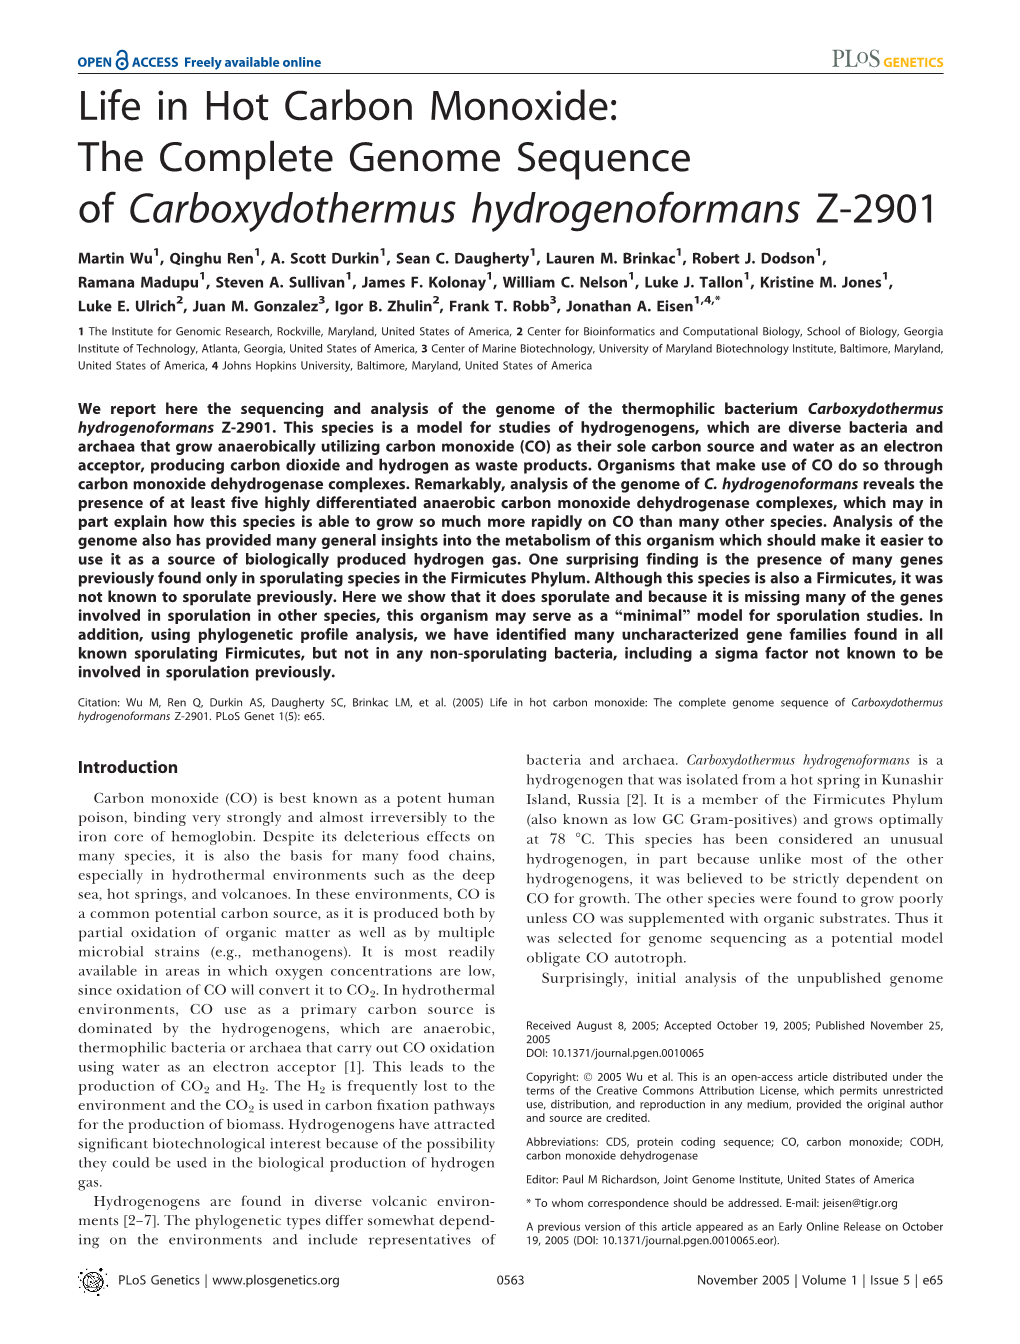 Life in Hot Carbon Monoxide: the Complete Genome Sequence of Carboxydothermus Hydrogenoformans Z-2901